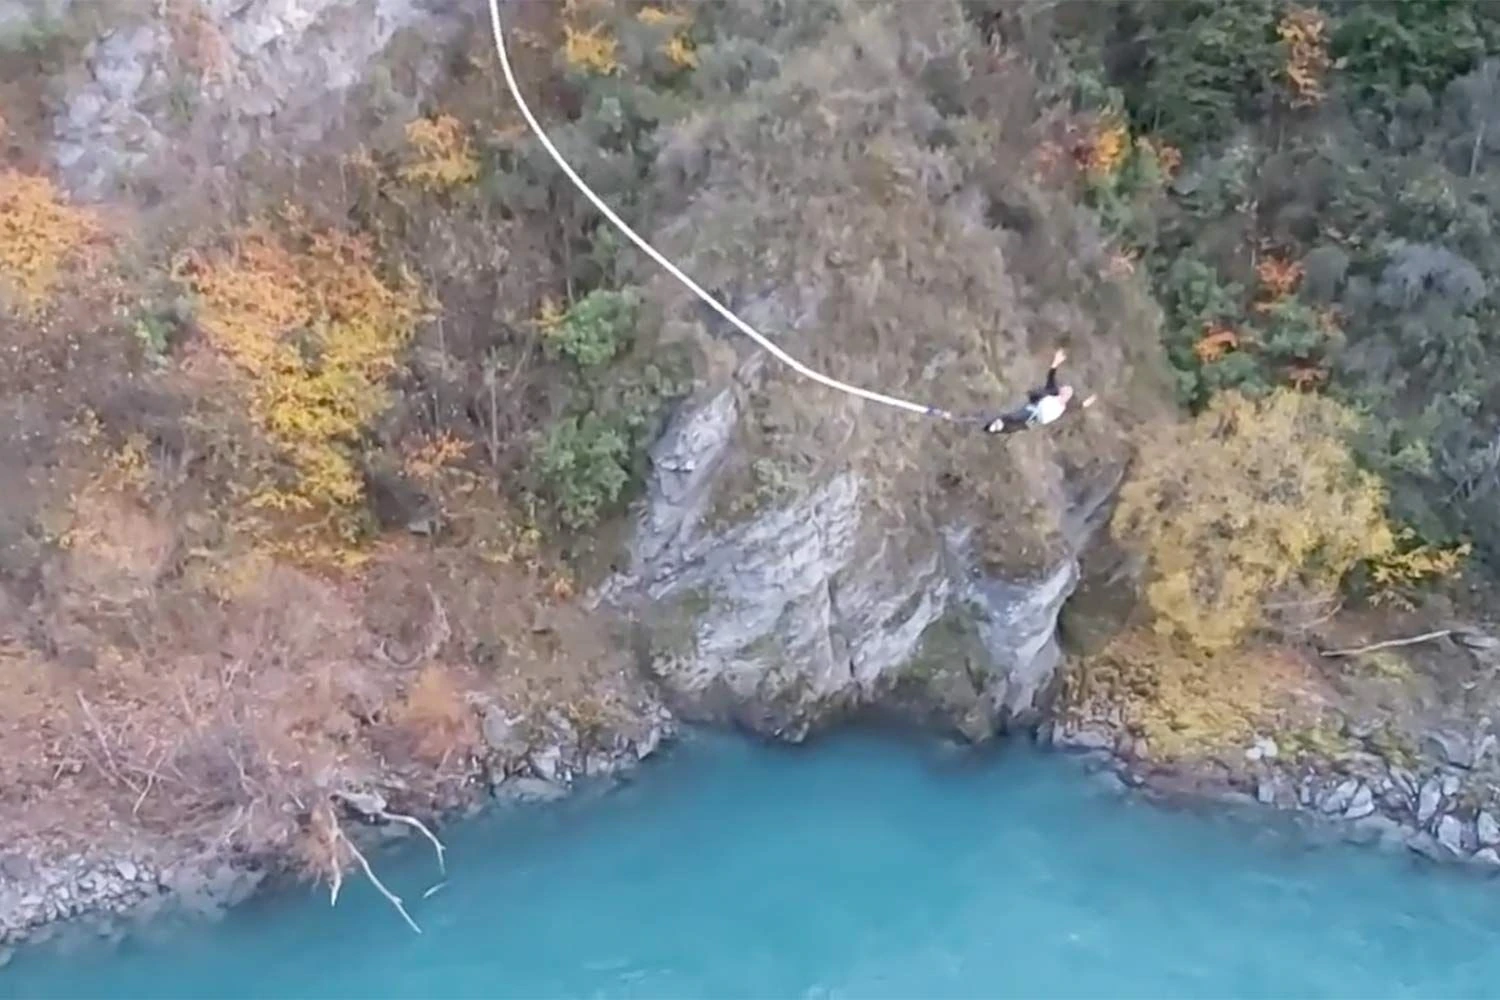 Mayor of Queenstown celebrates New Zealand's reopening by bungee jumping